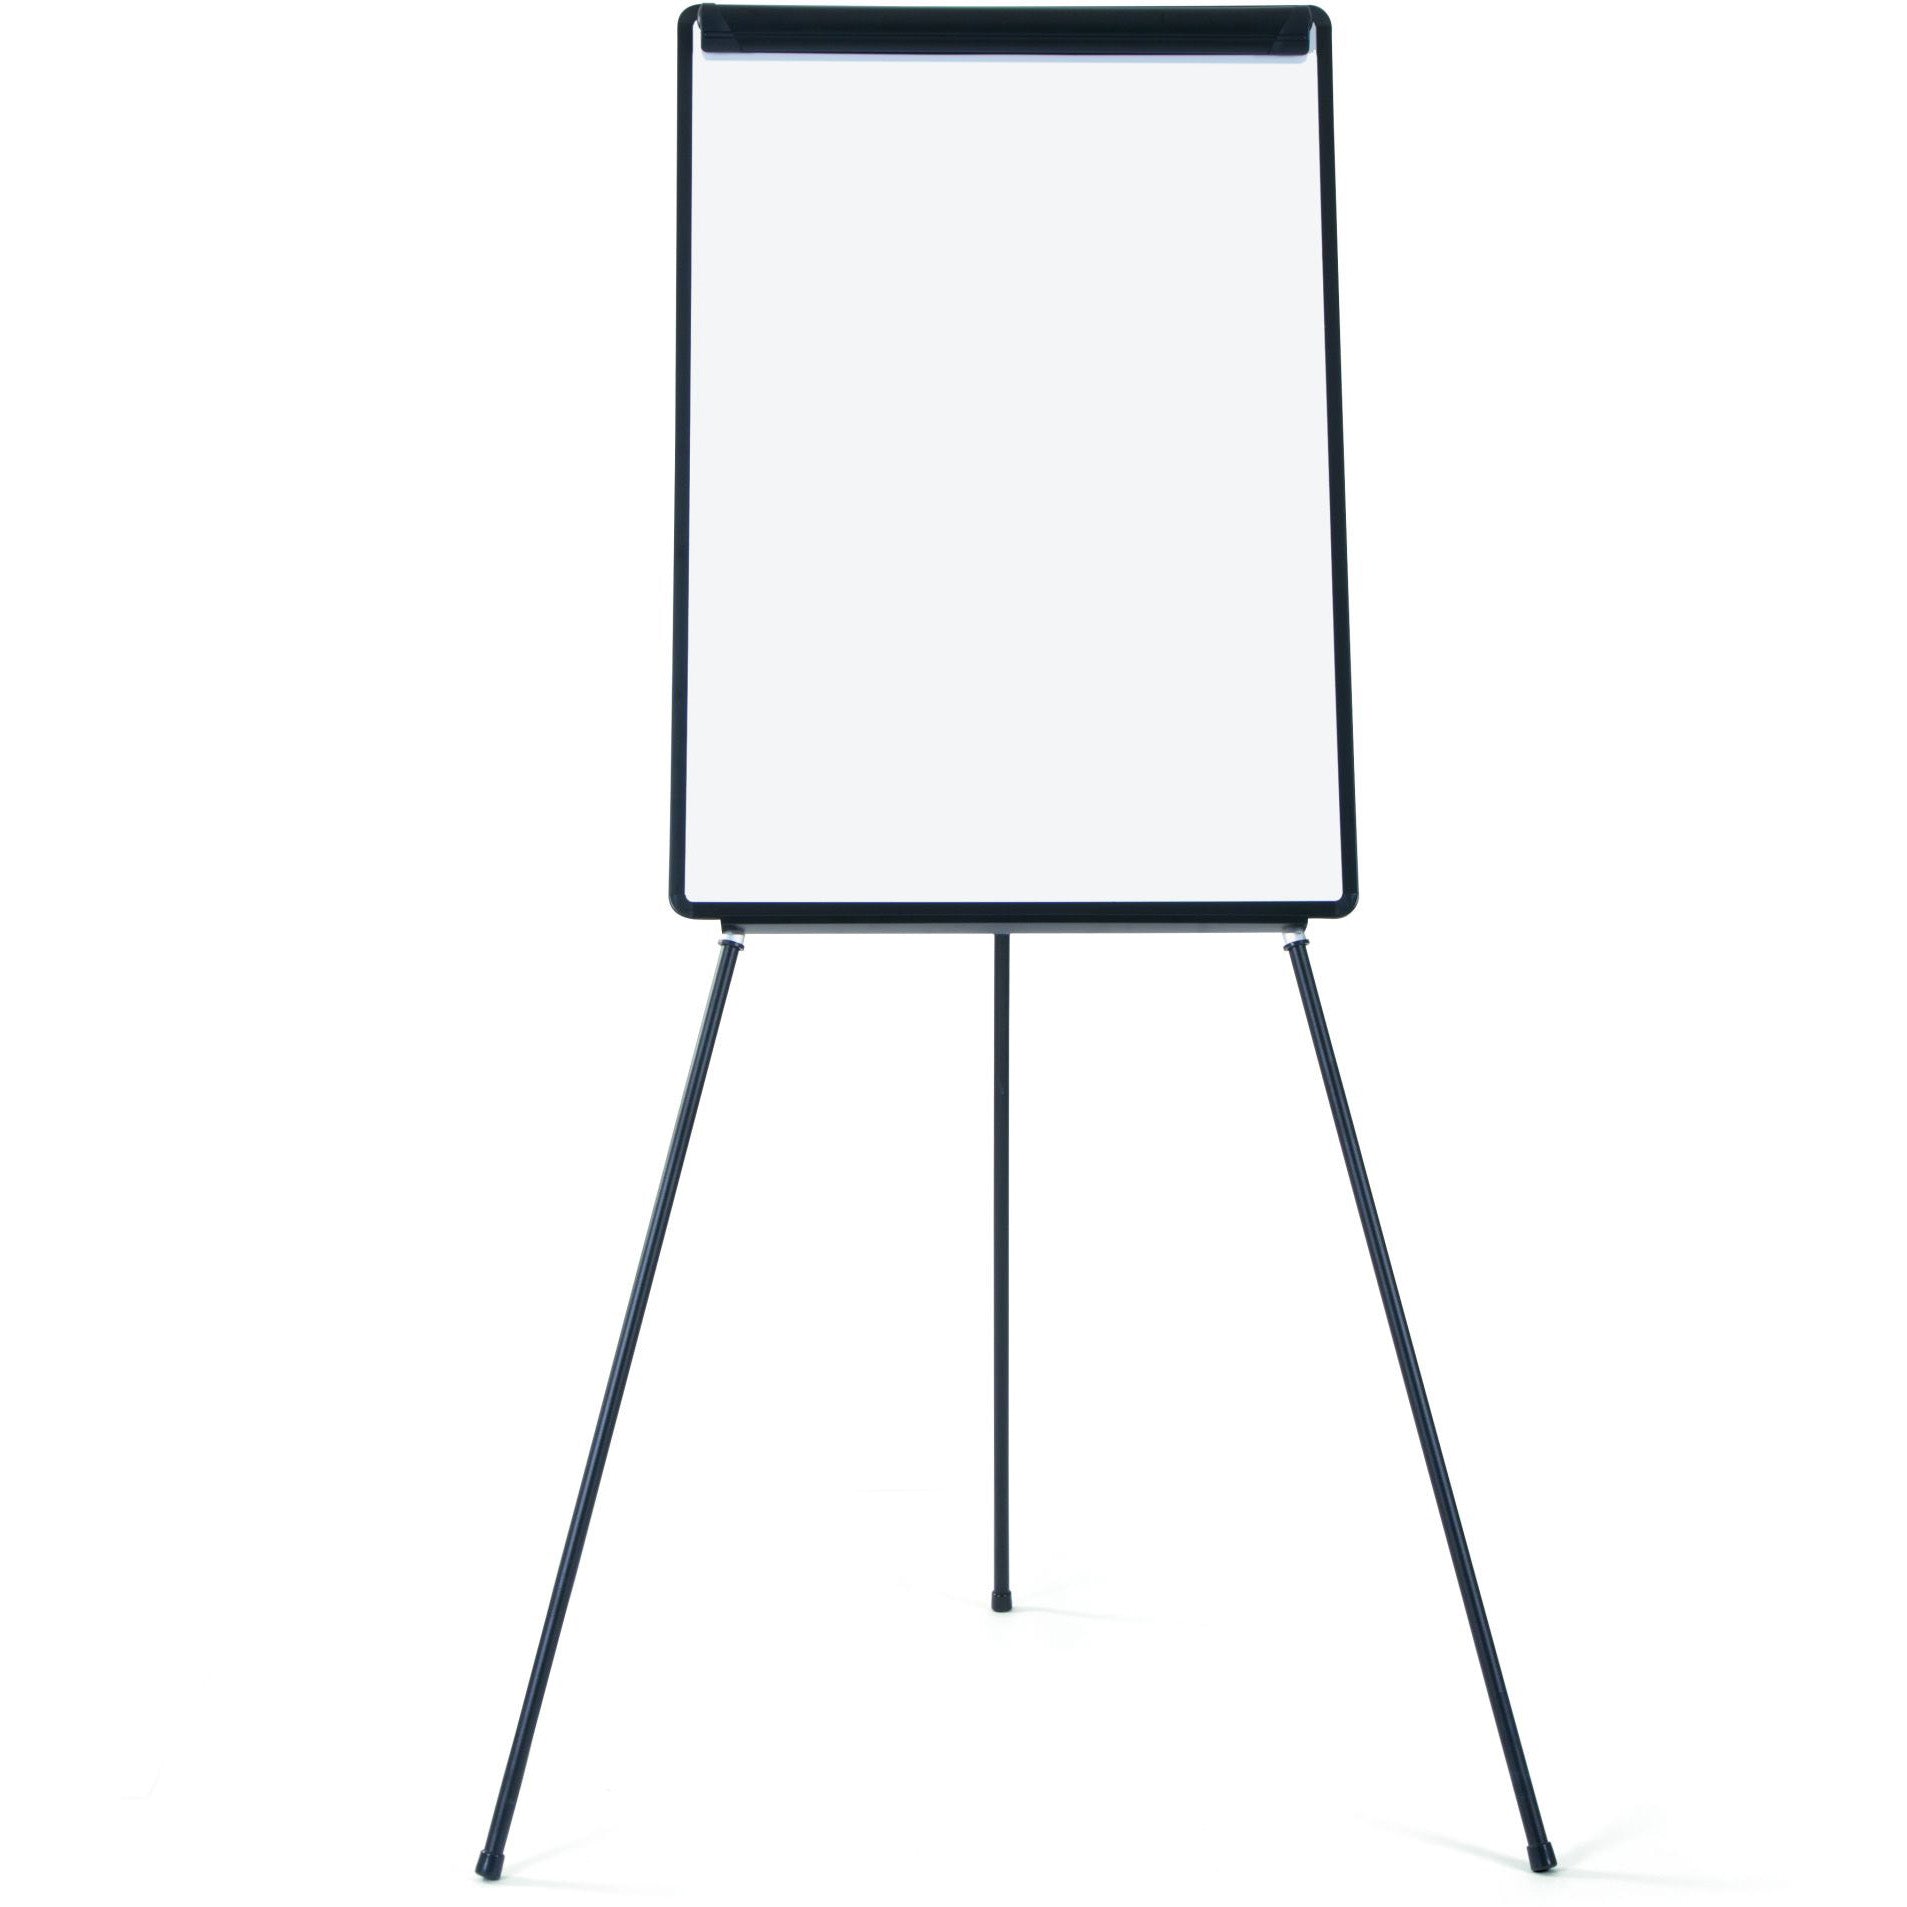 EA23000475 Height Adjustable Tripod Dry Erase White Board Presentation Easel, Easel Pad Holder, Marker Tray, 42" x 30", Black Plastic Frame by MasterVision